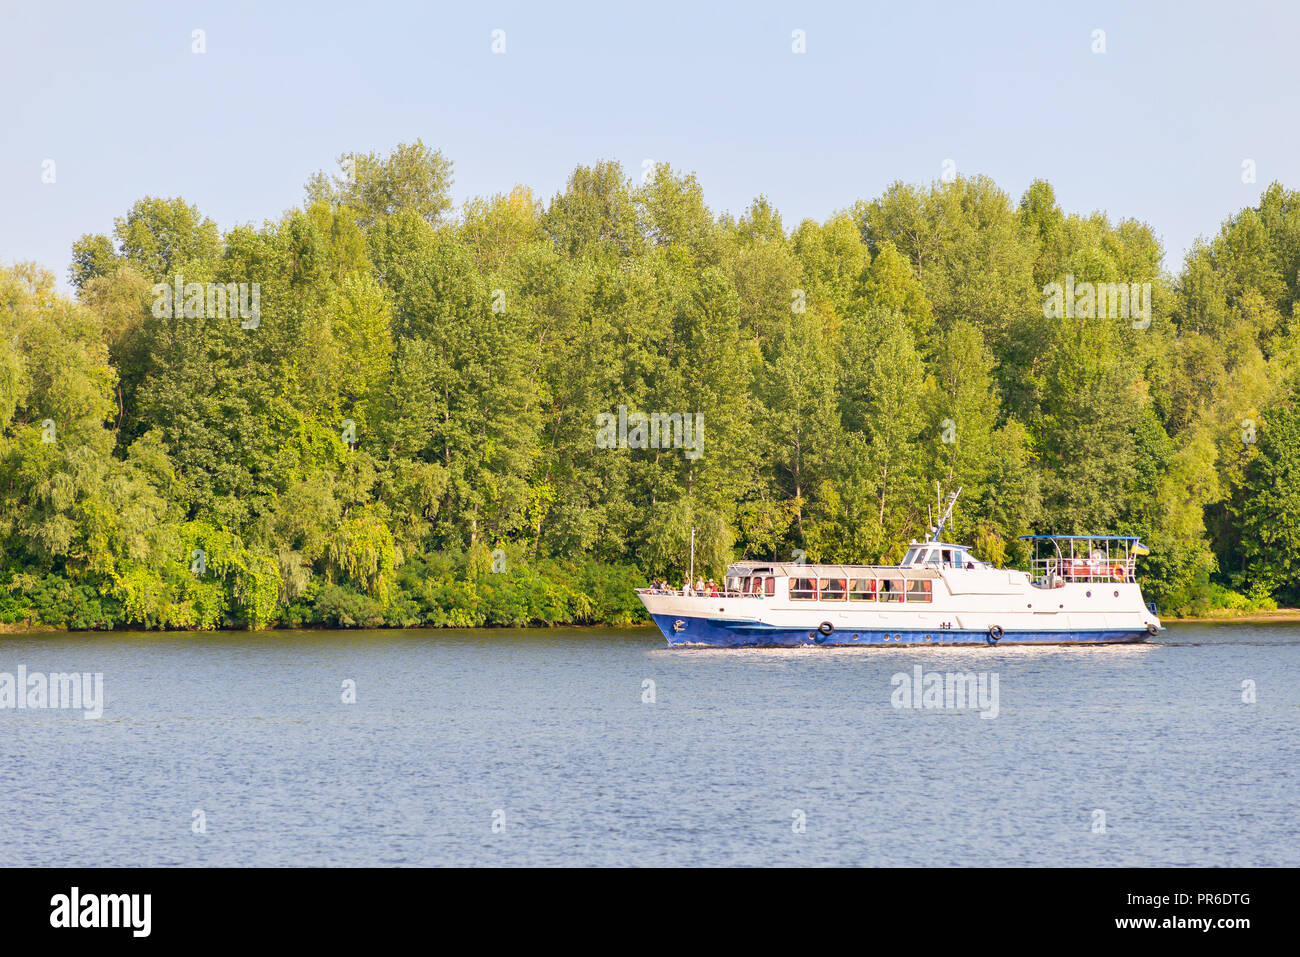 A white and blue boat on the Dnieper river, close to the shore with a forest of trees, in Kiev, Ukraine Stock Photo